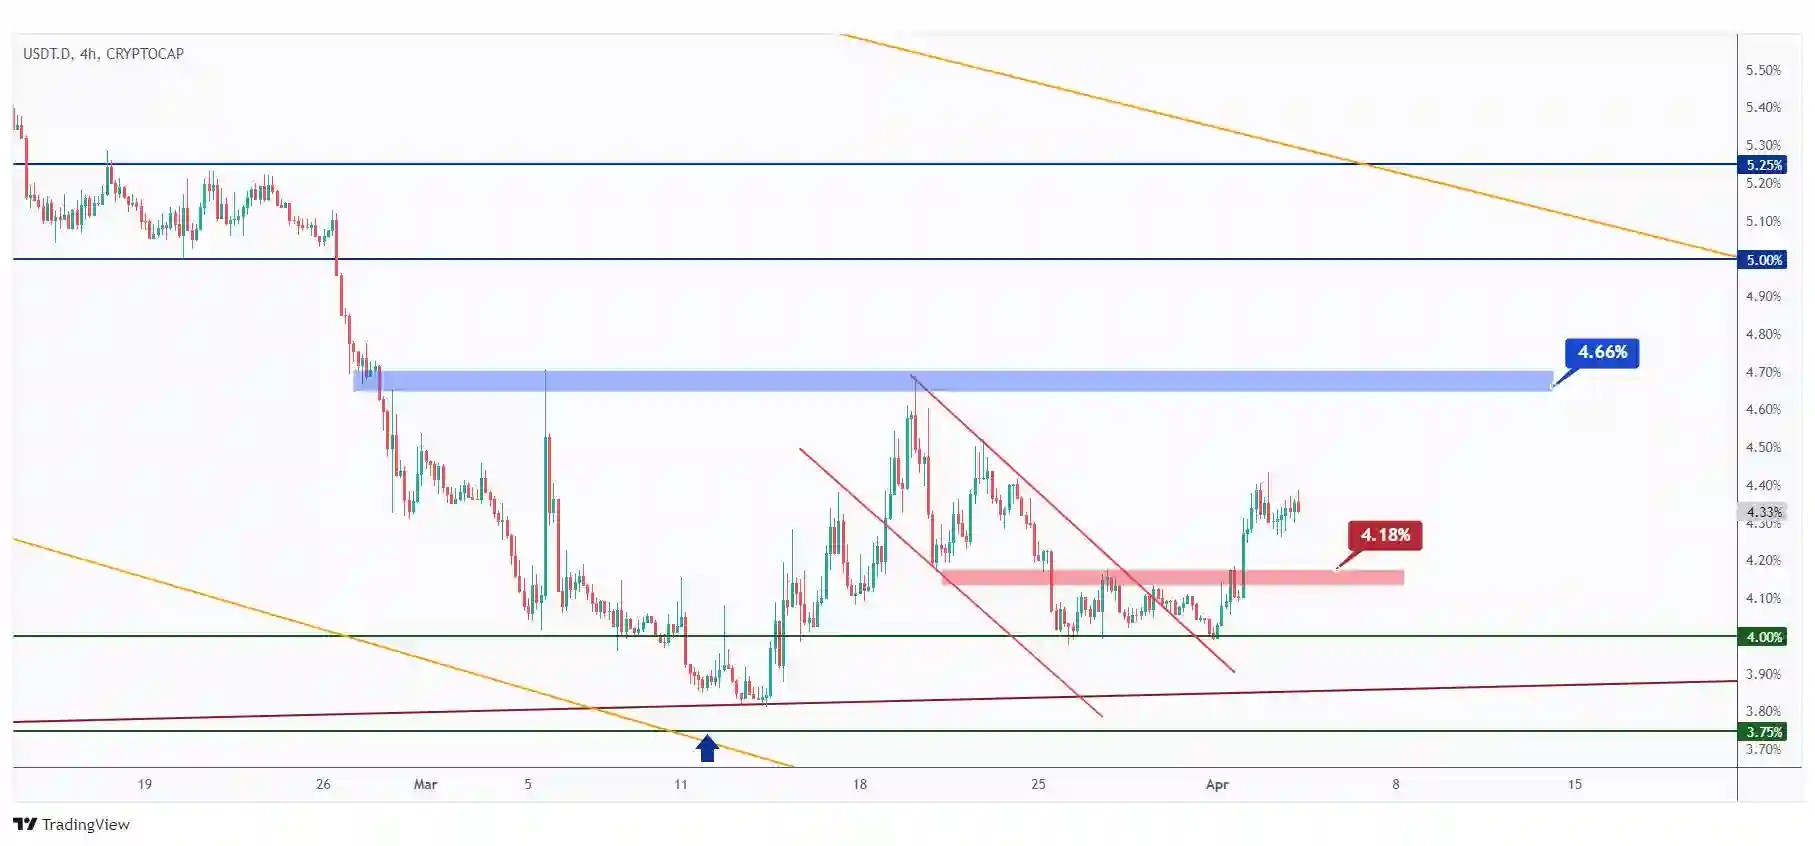 USDT.D 4h chart overall bullish as long as the 4.18% support holds.